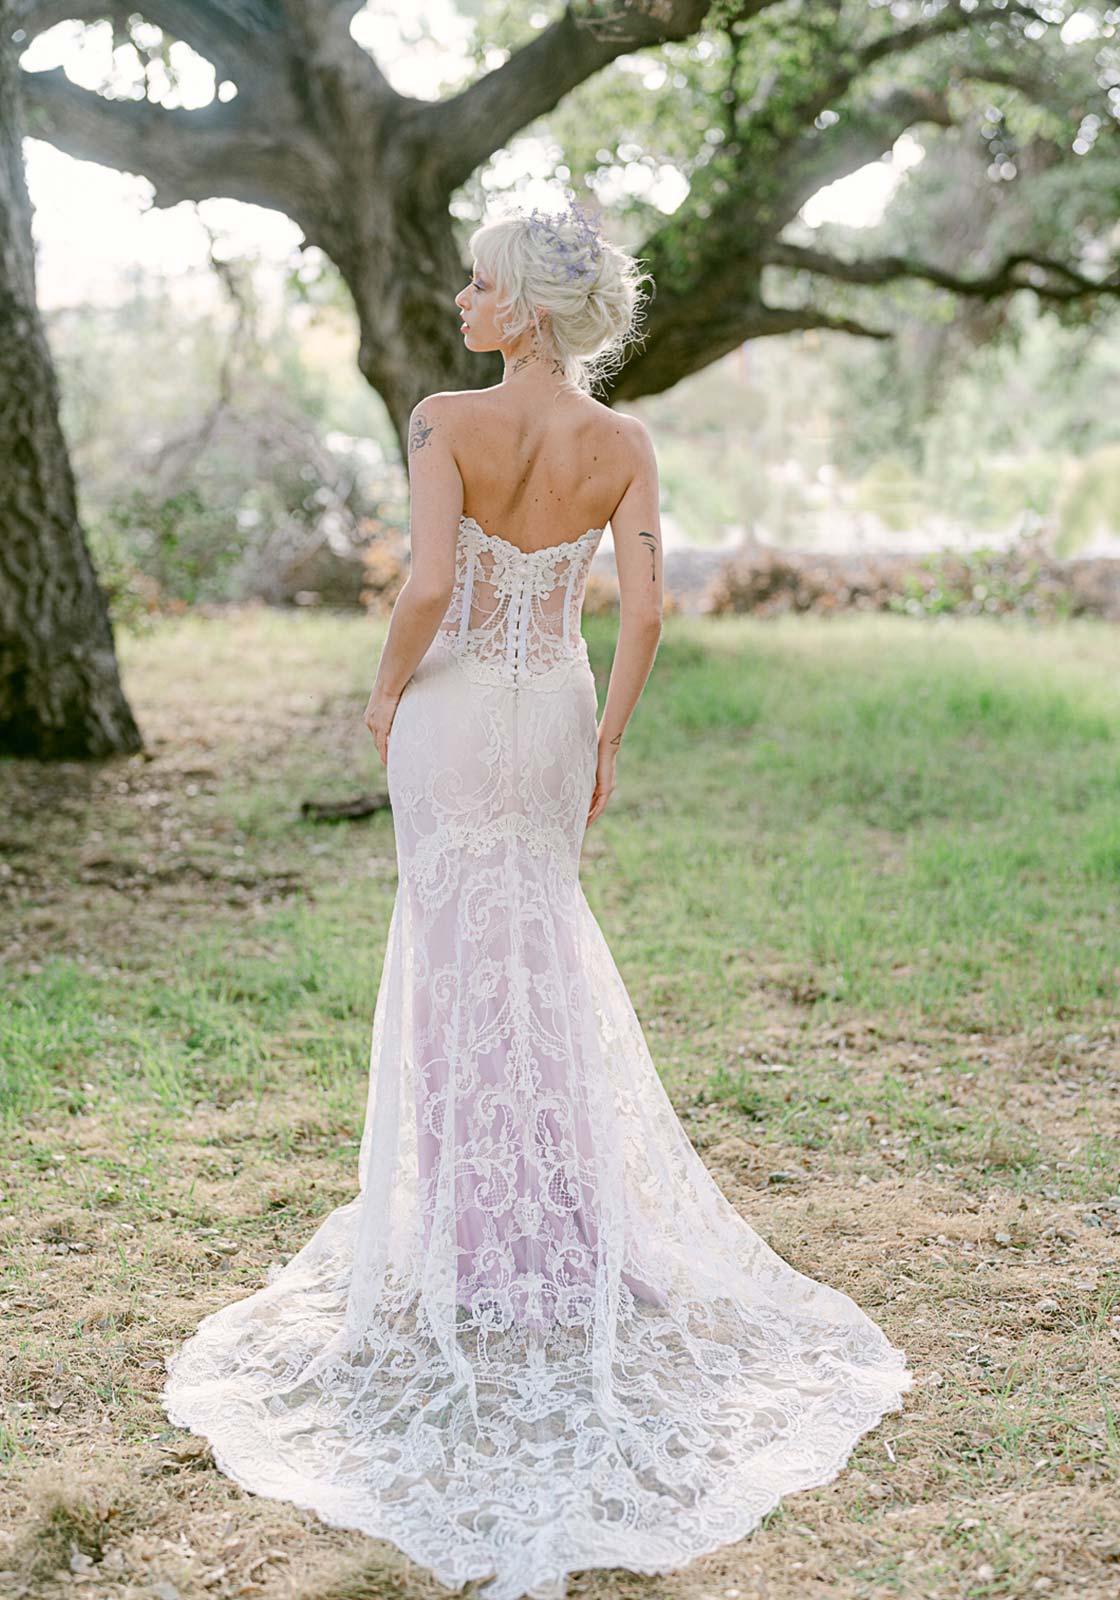 Quill Floral Lace Wedding Gown with Colorful Ombre Silk